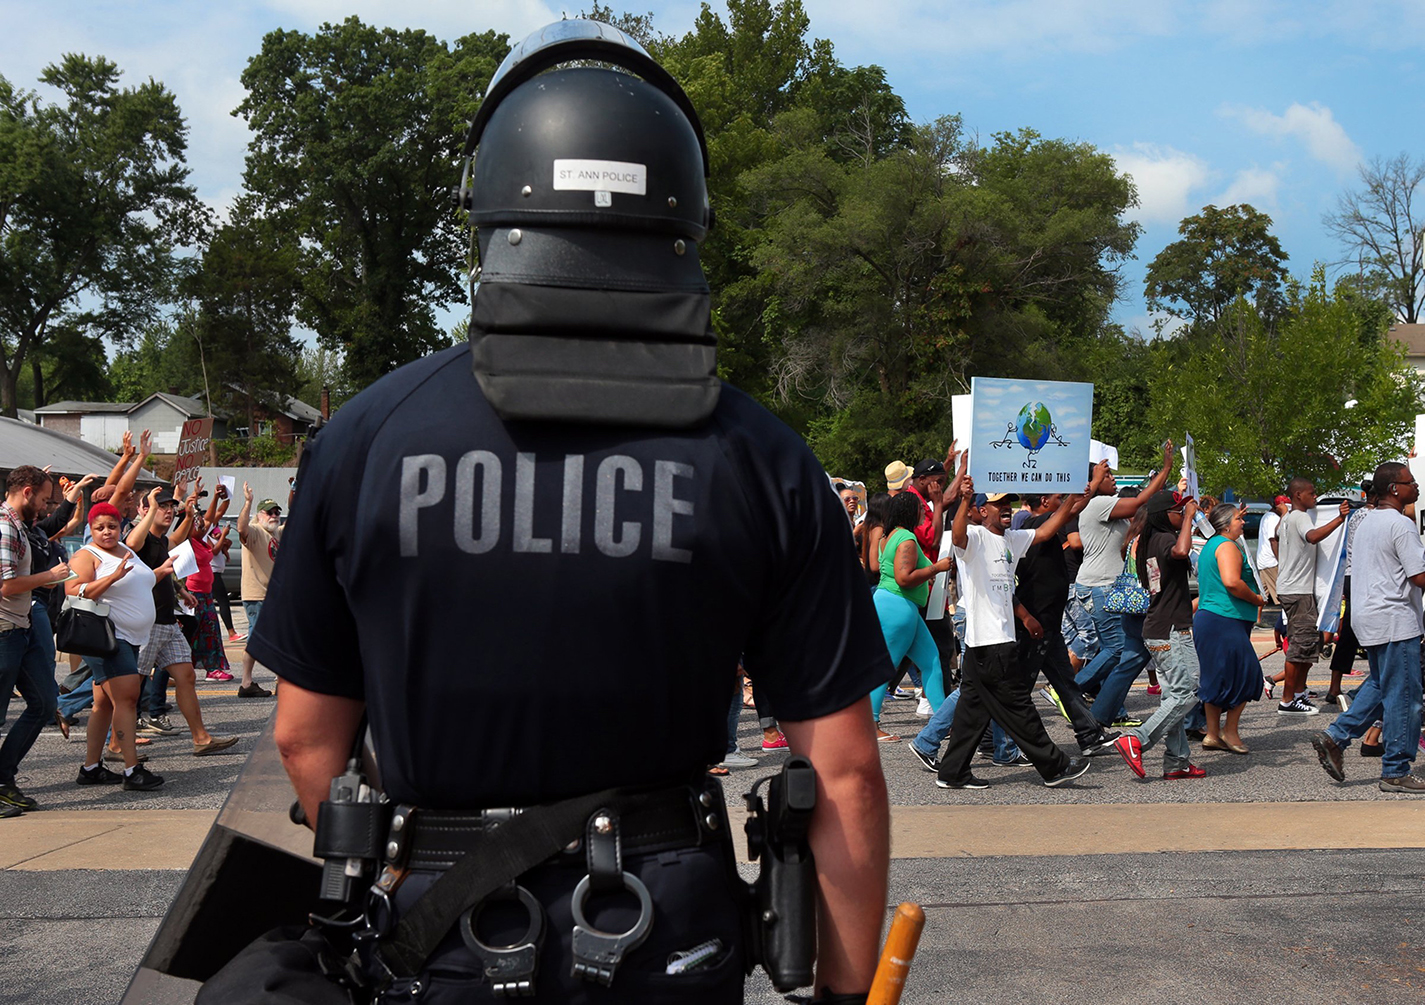 A police officer watches as protesters march in front of the Ferguson, Missouri, police station in August 2014. Law enforcement’s treatment of minorities has continued to be a nationwide issue ever since.